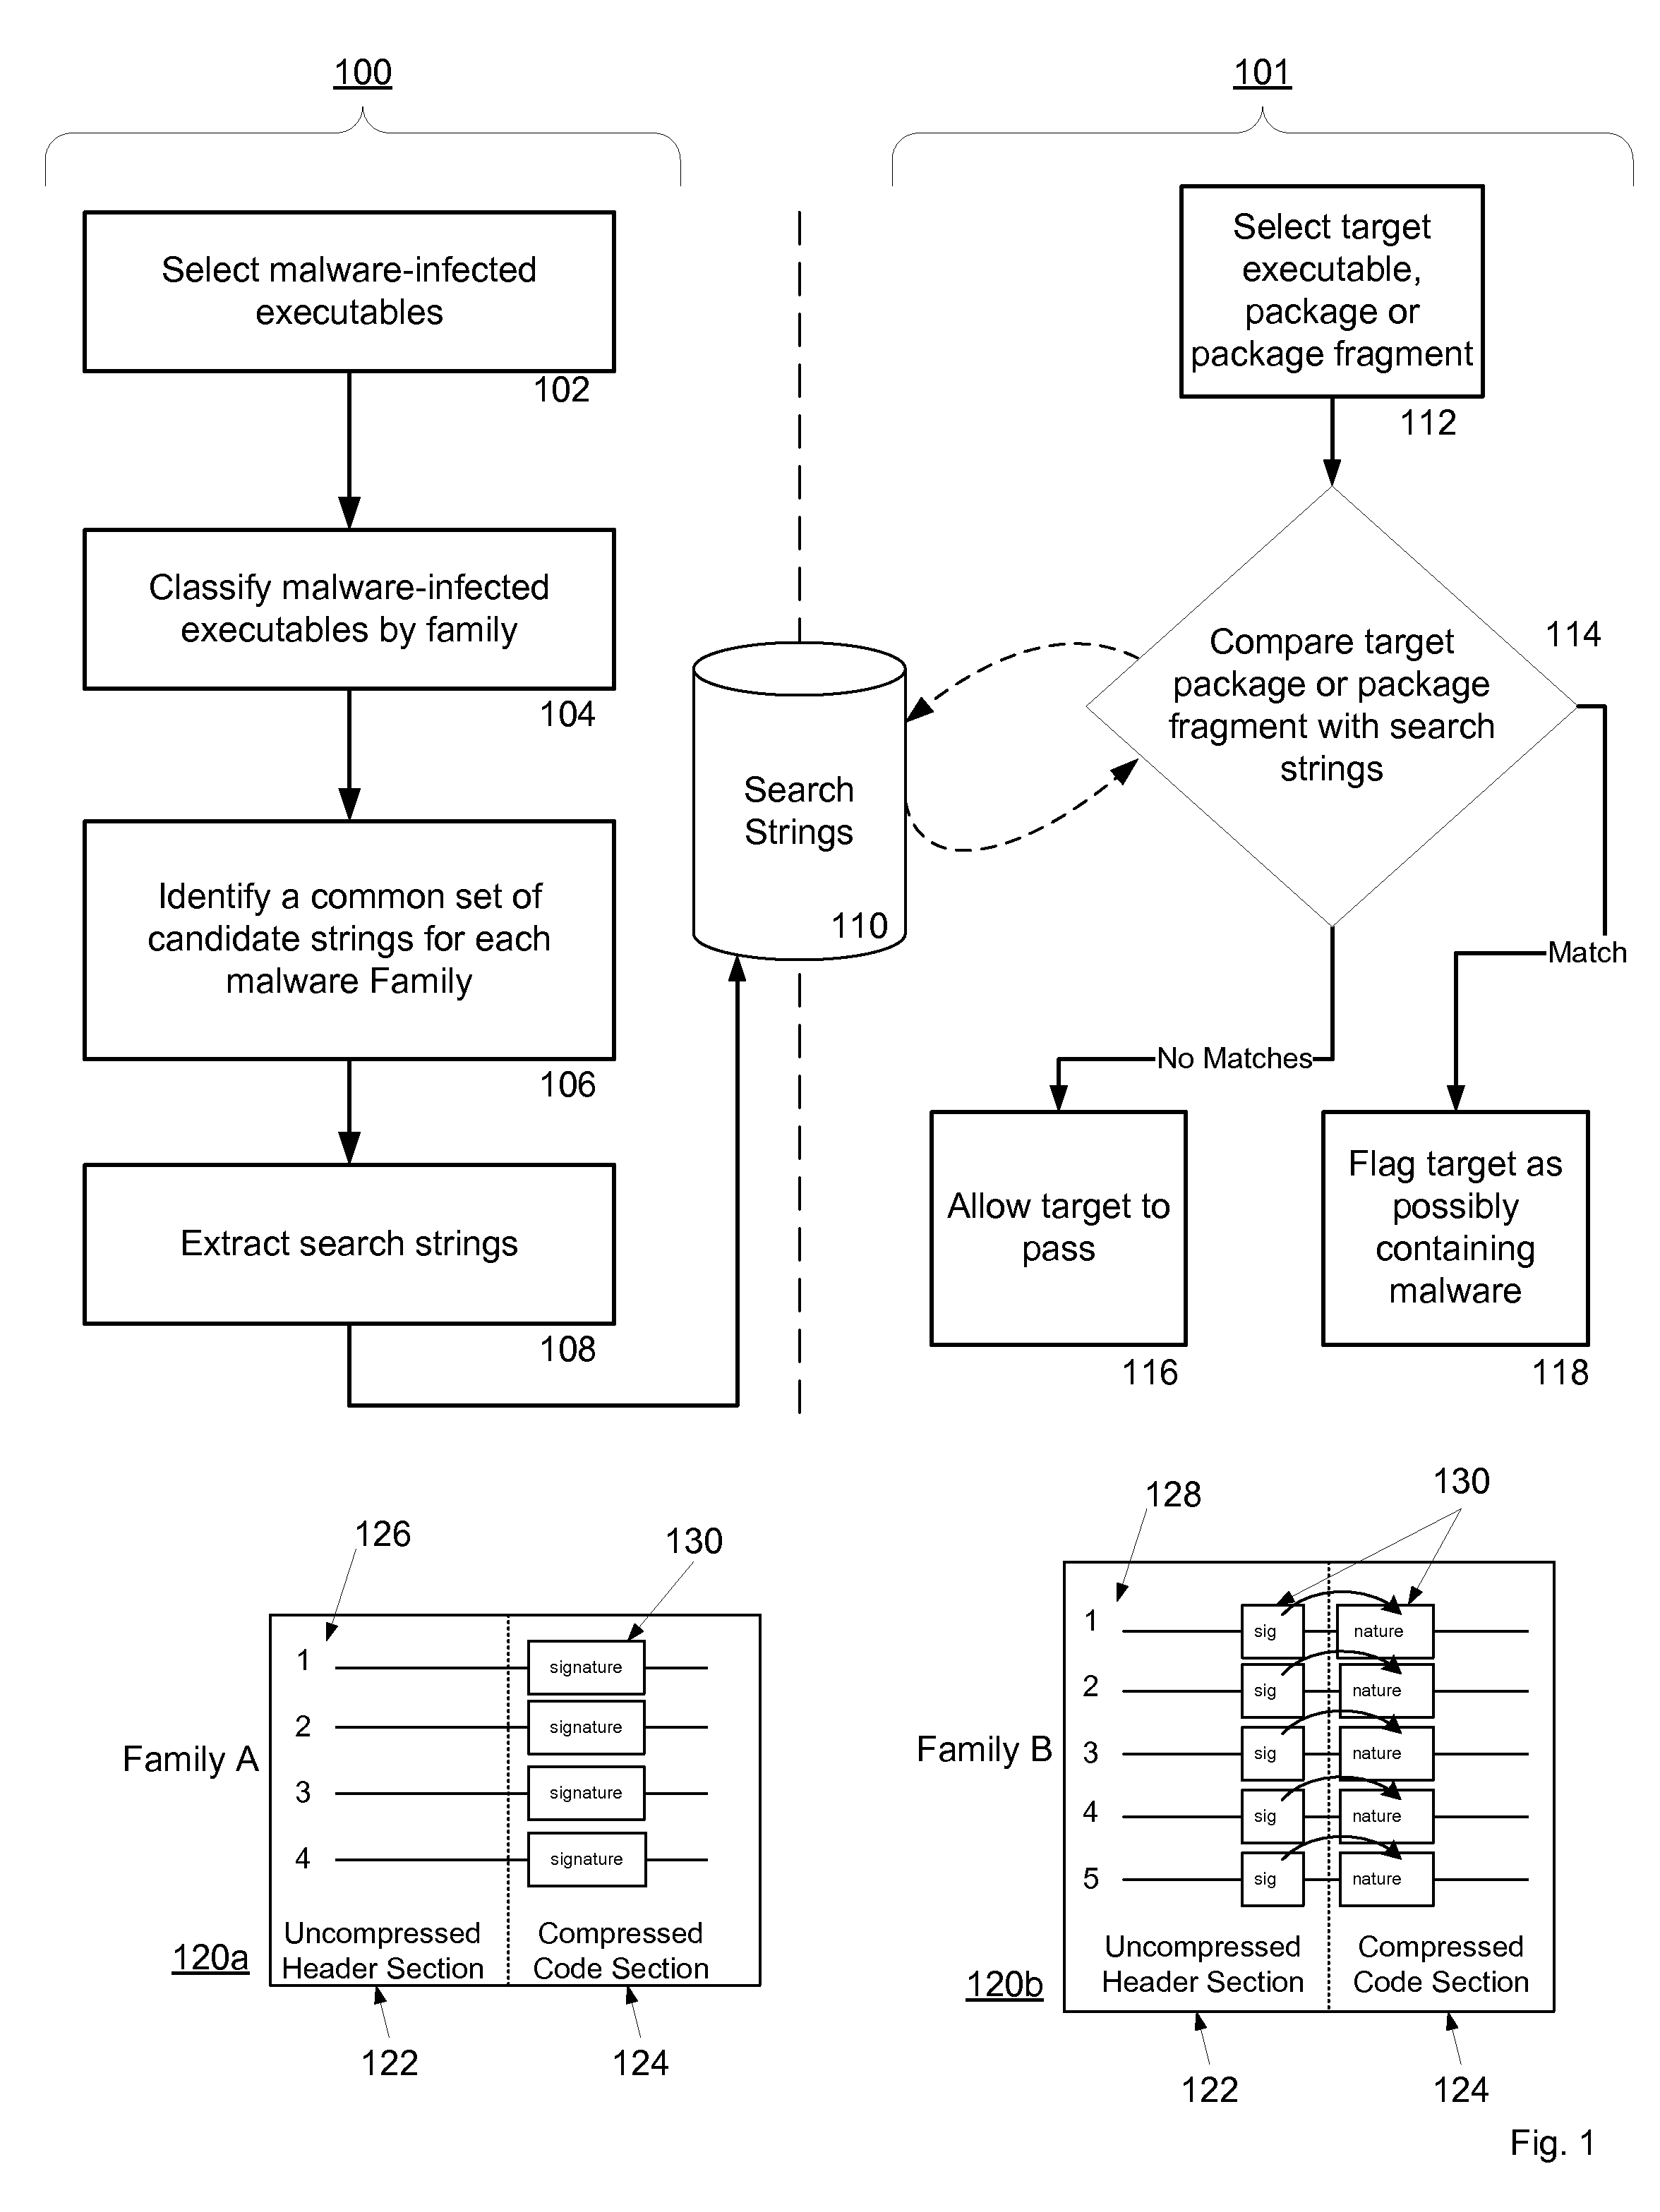 System and Method for Managing Malware Protection on Mobile Devices